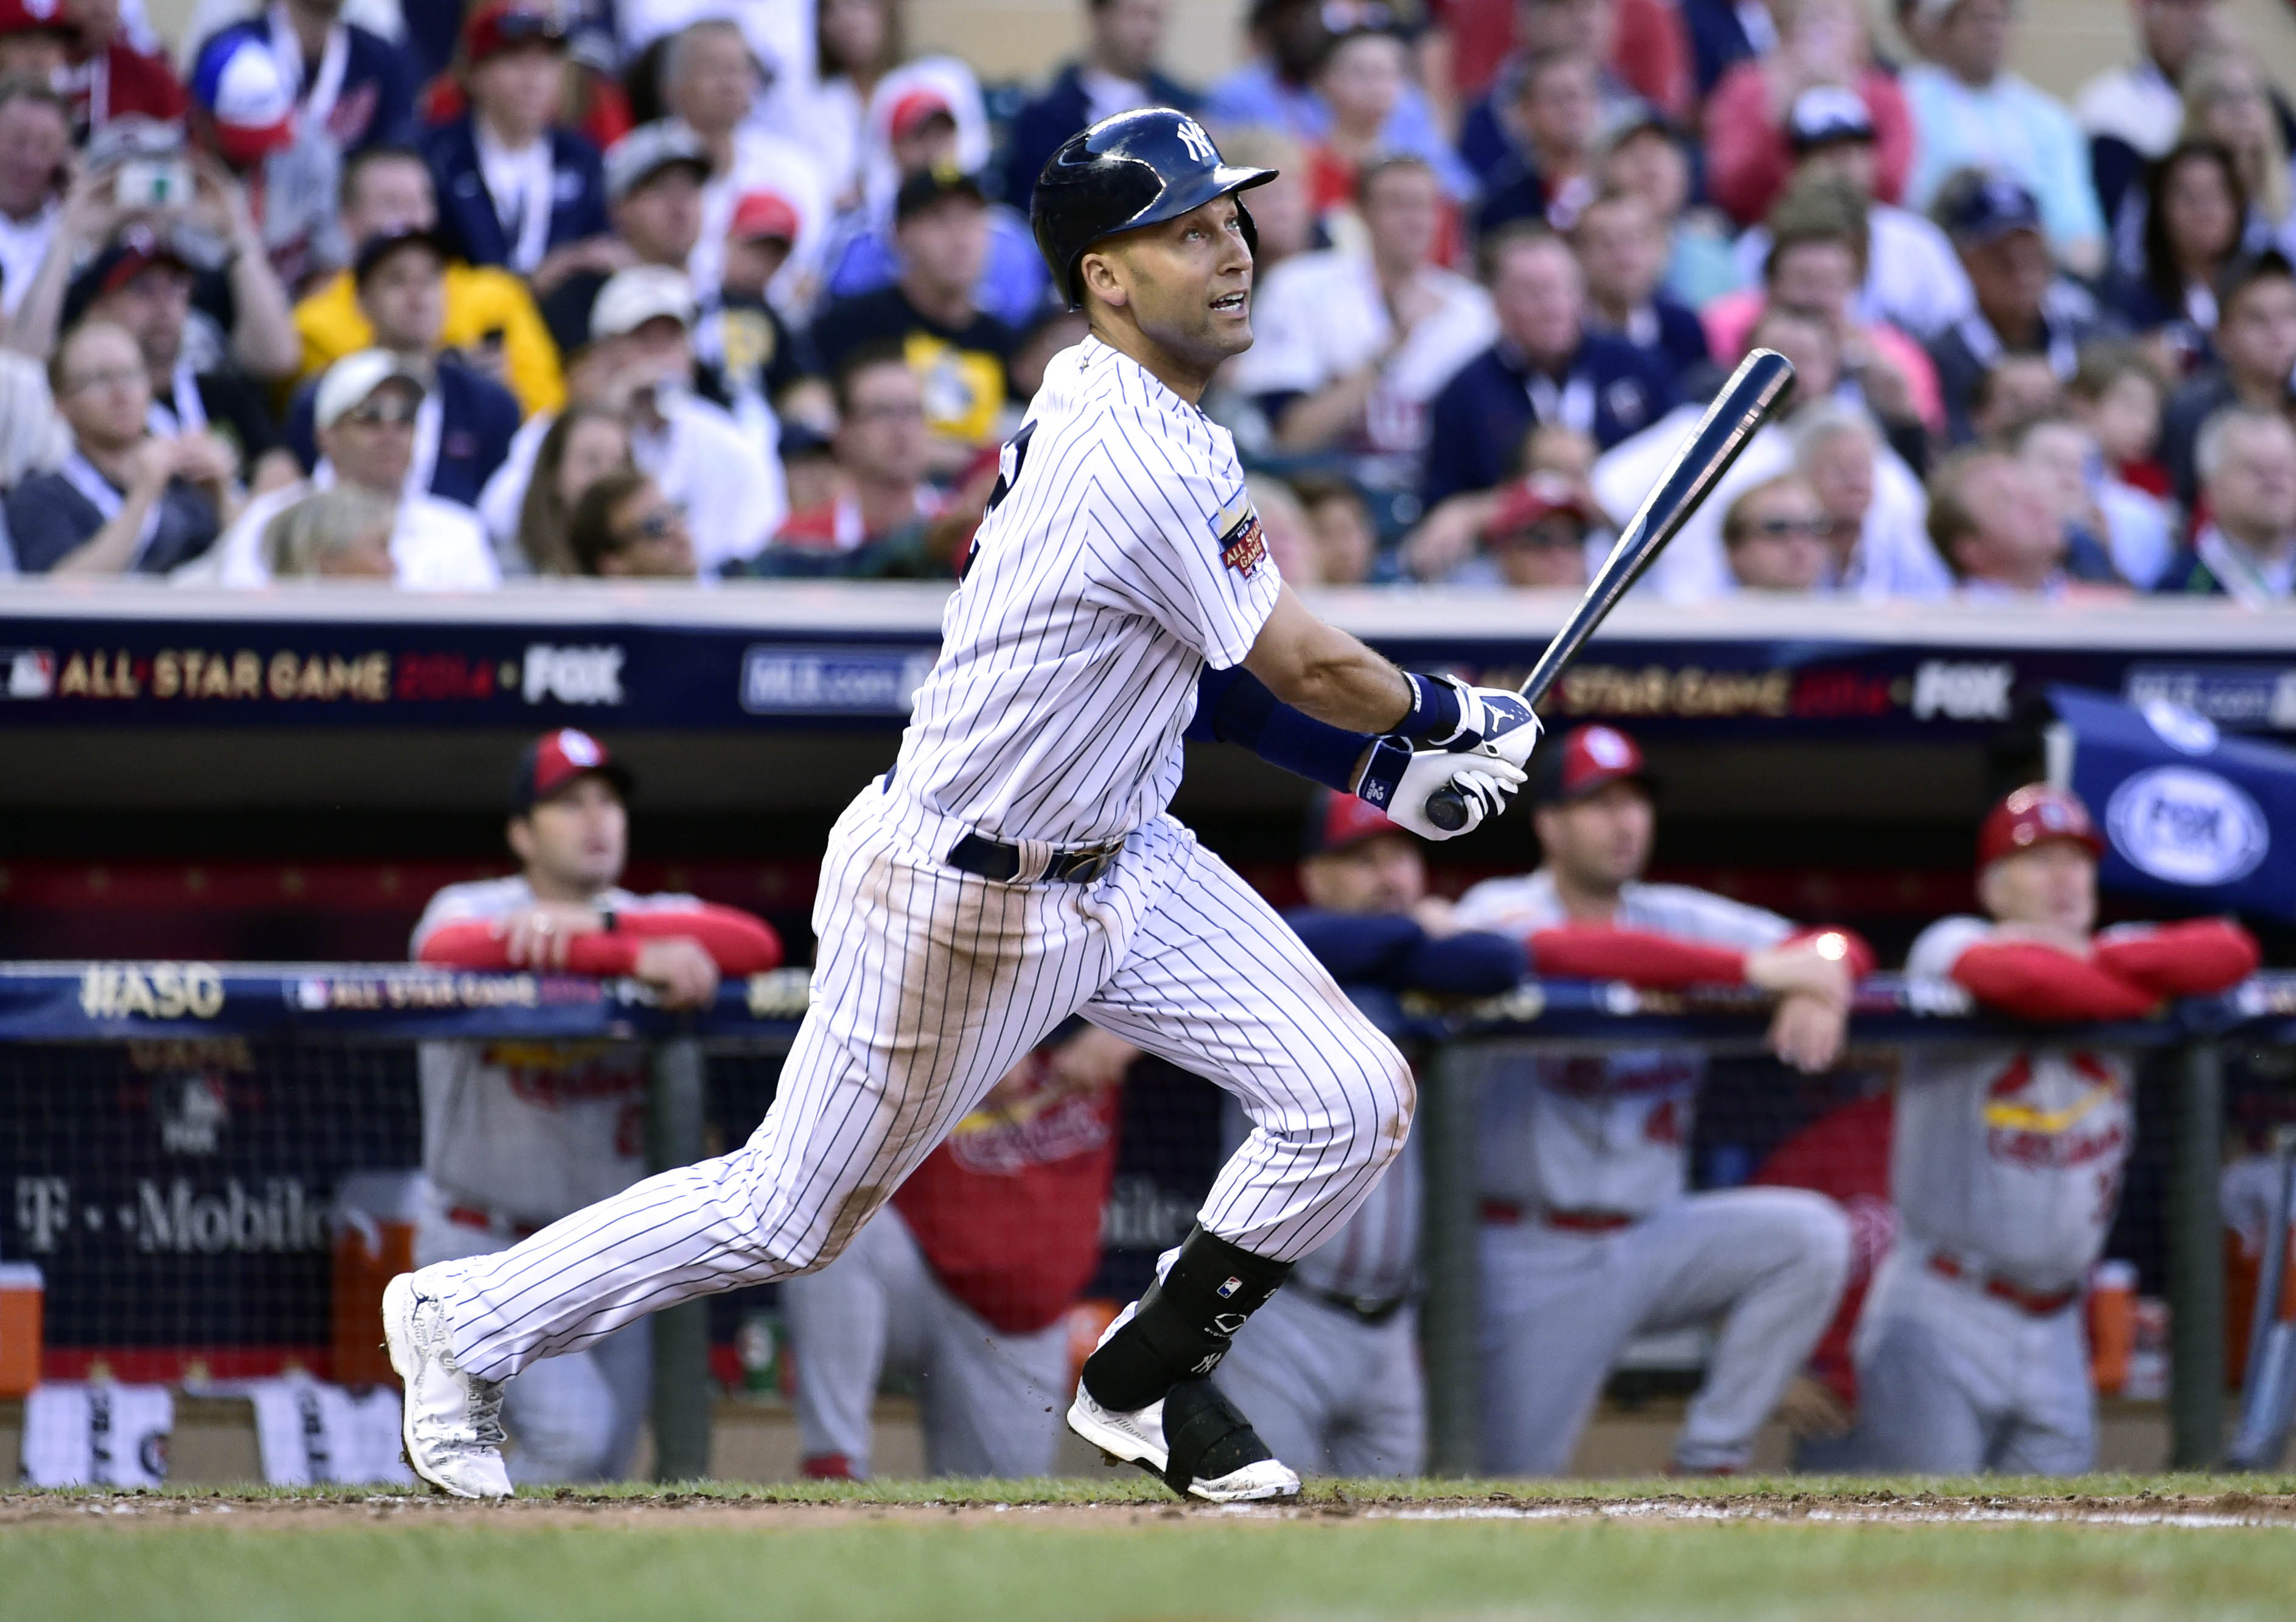 Derek Jeter singles to right in the third inning for his second hit of the game. (Scott Rovak, USA TODAY Sports)